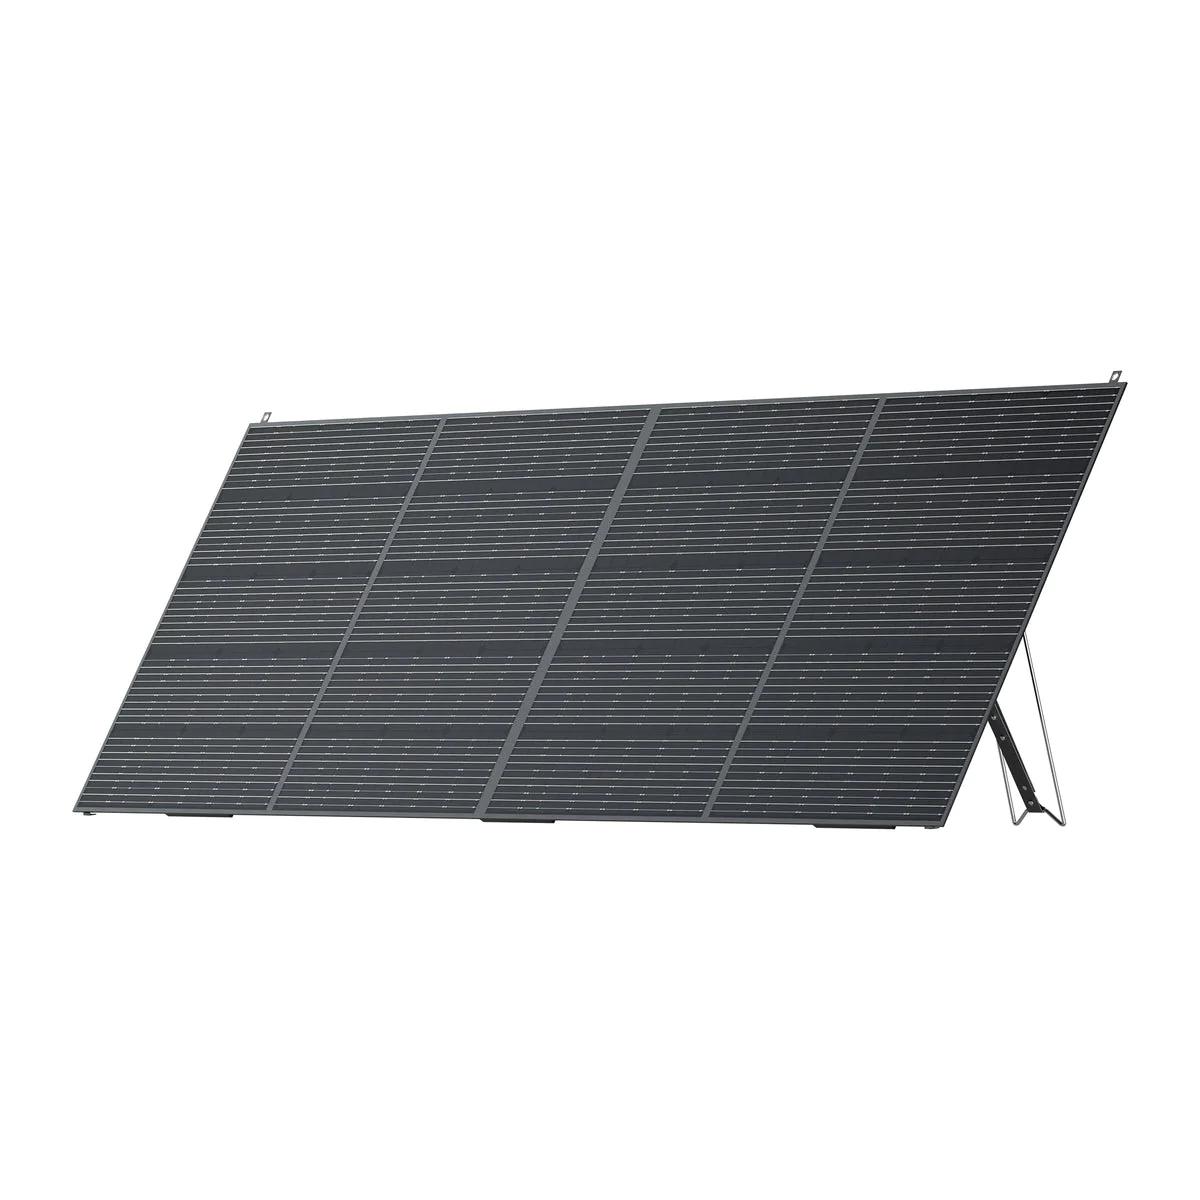 buy solar panels online nz - Can you install solar panels yourself in NZ